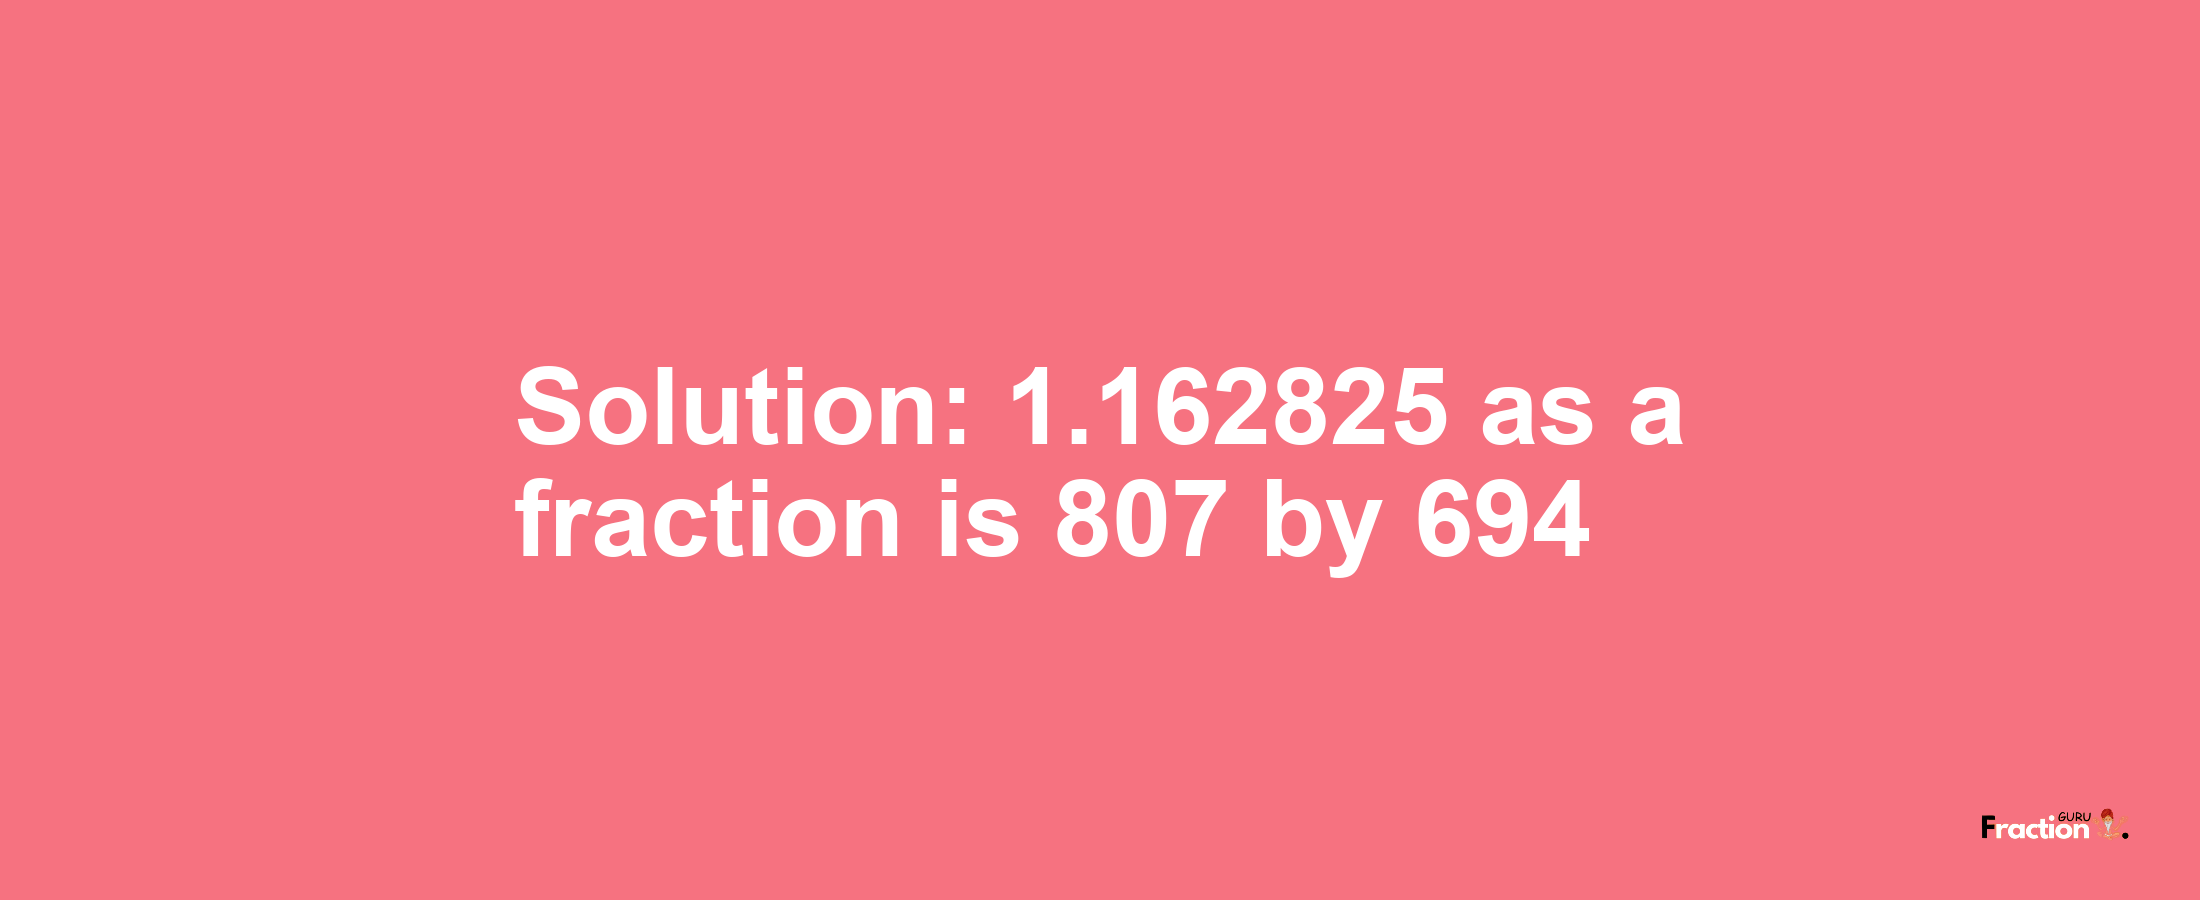 Solution:1.162825 as a fraction is 807/694